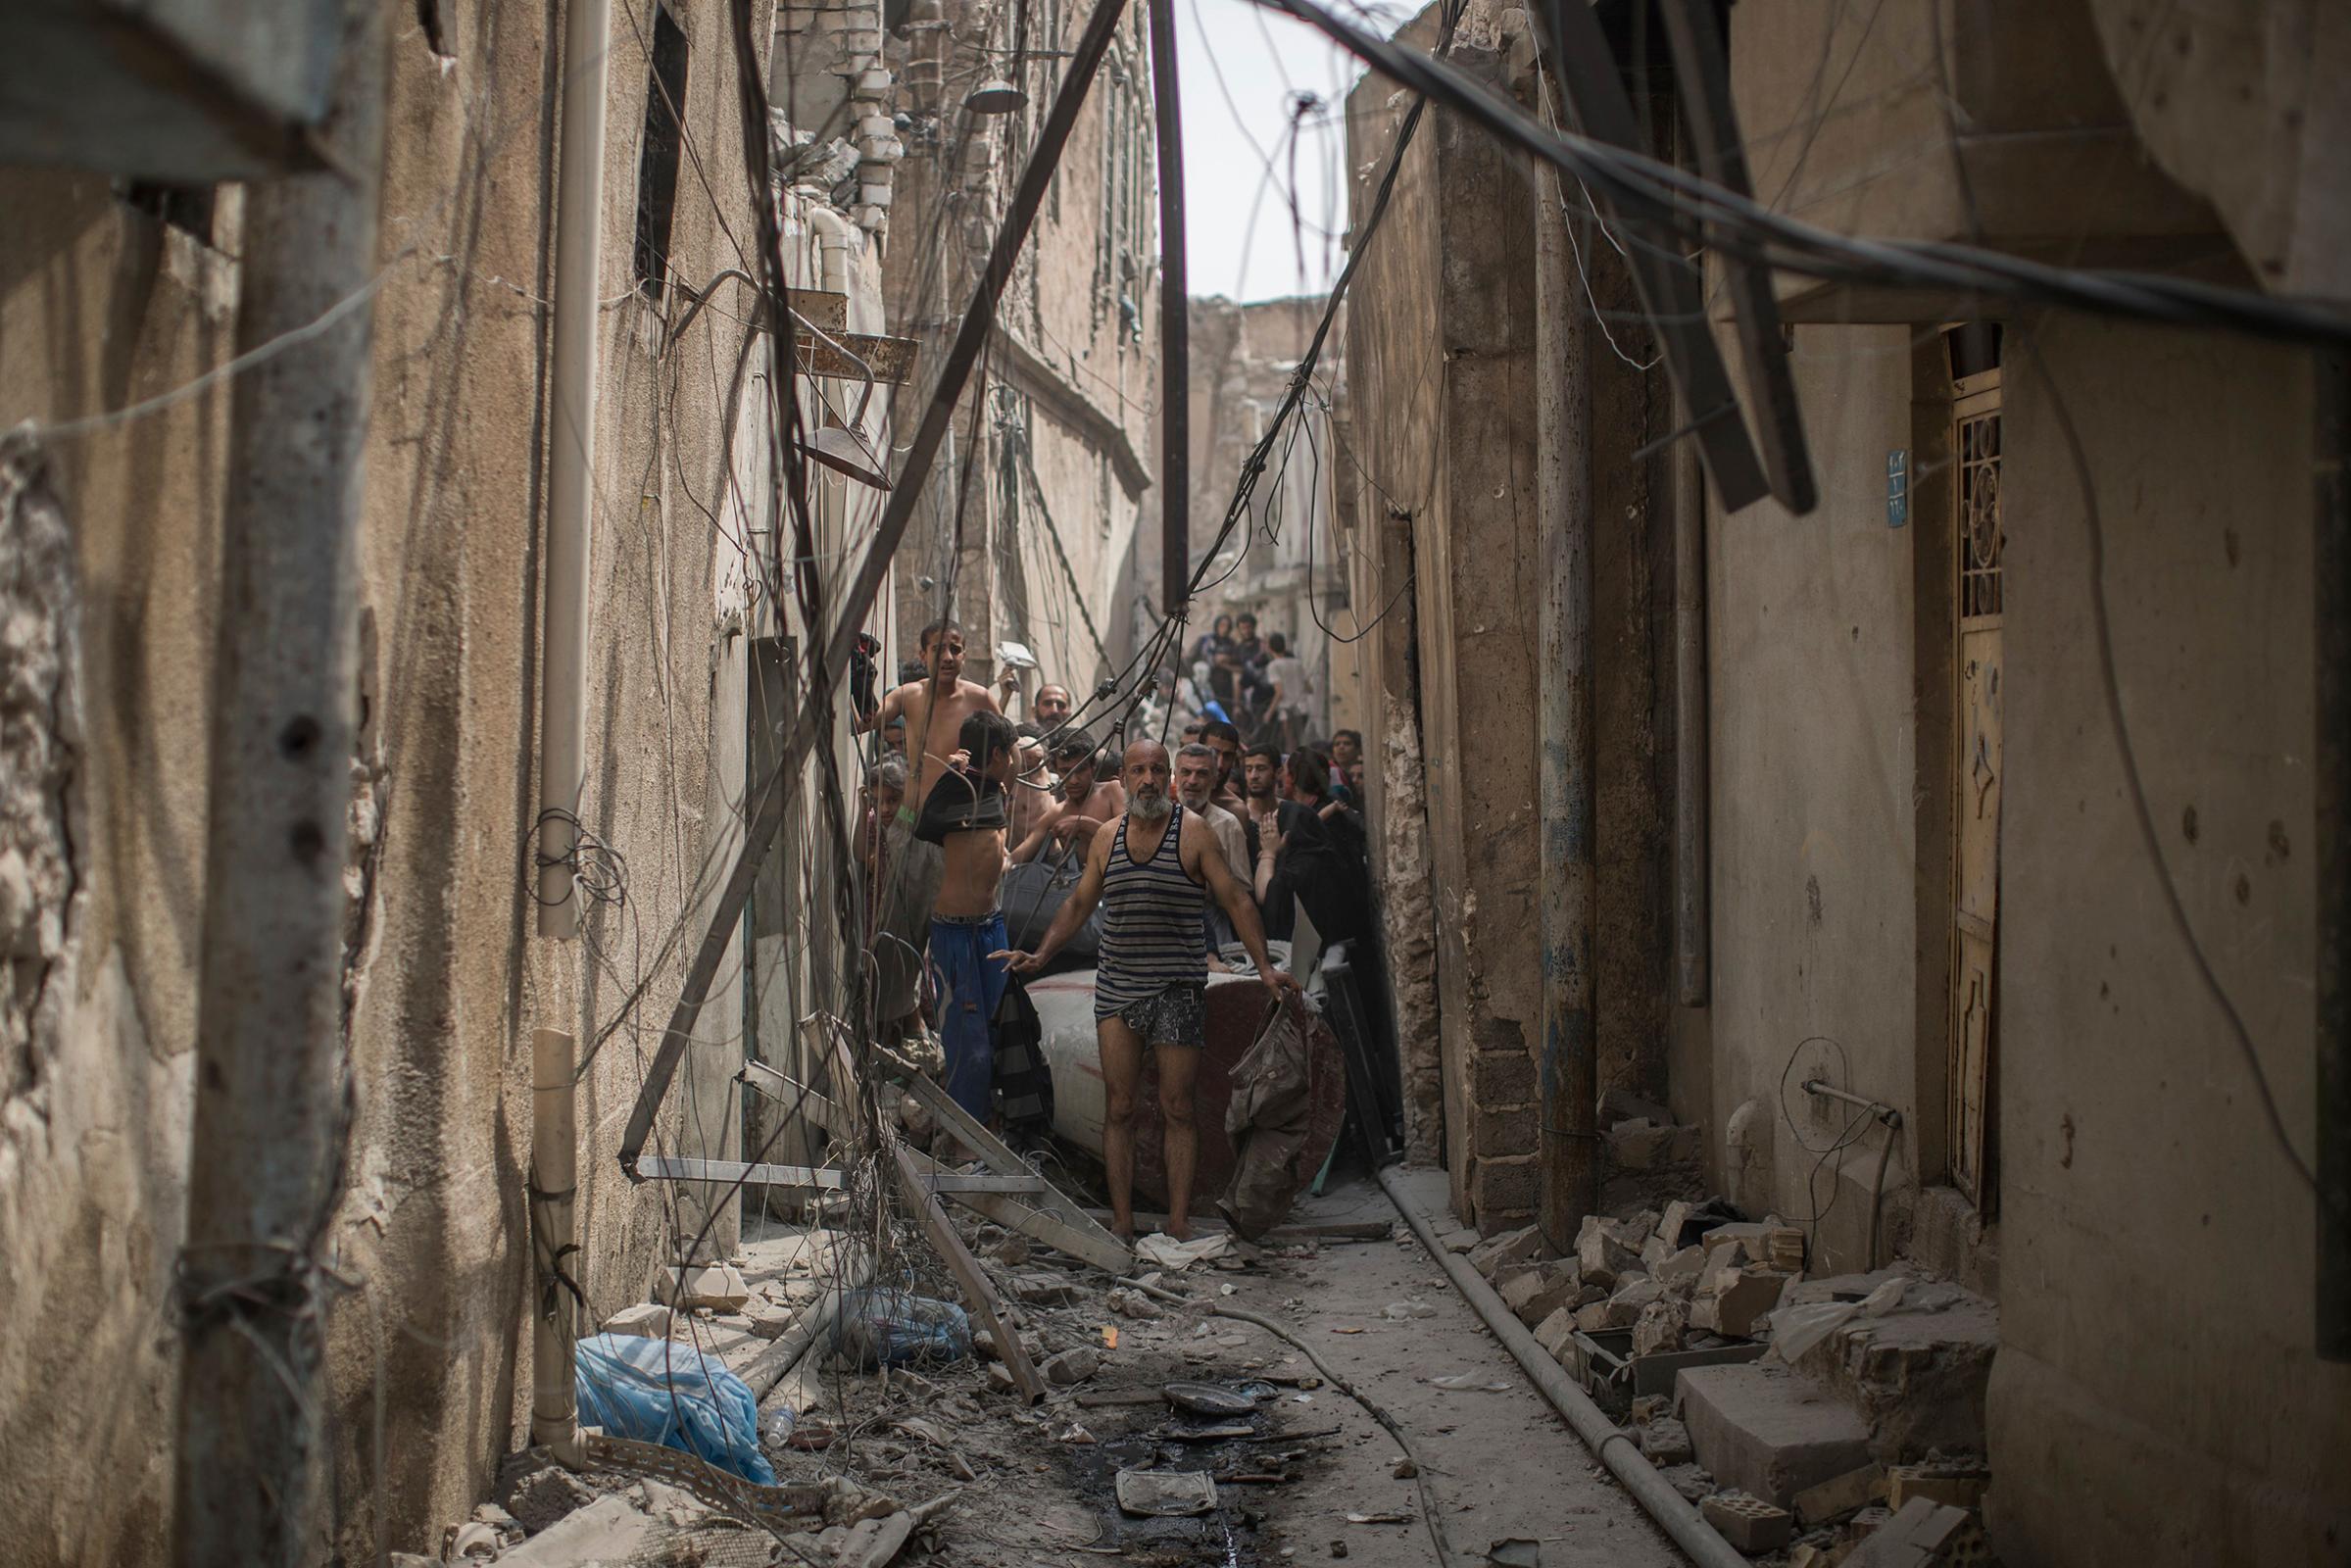 Civilians trying to flee get undressed to be checked for explosives after suicide bombers exploded as Iraqi forces continue their advance against Islamic State militants in the Old City of Mosul, Iraq, on July 3, 2017.